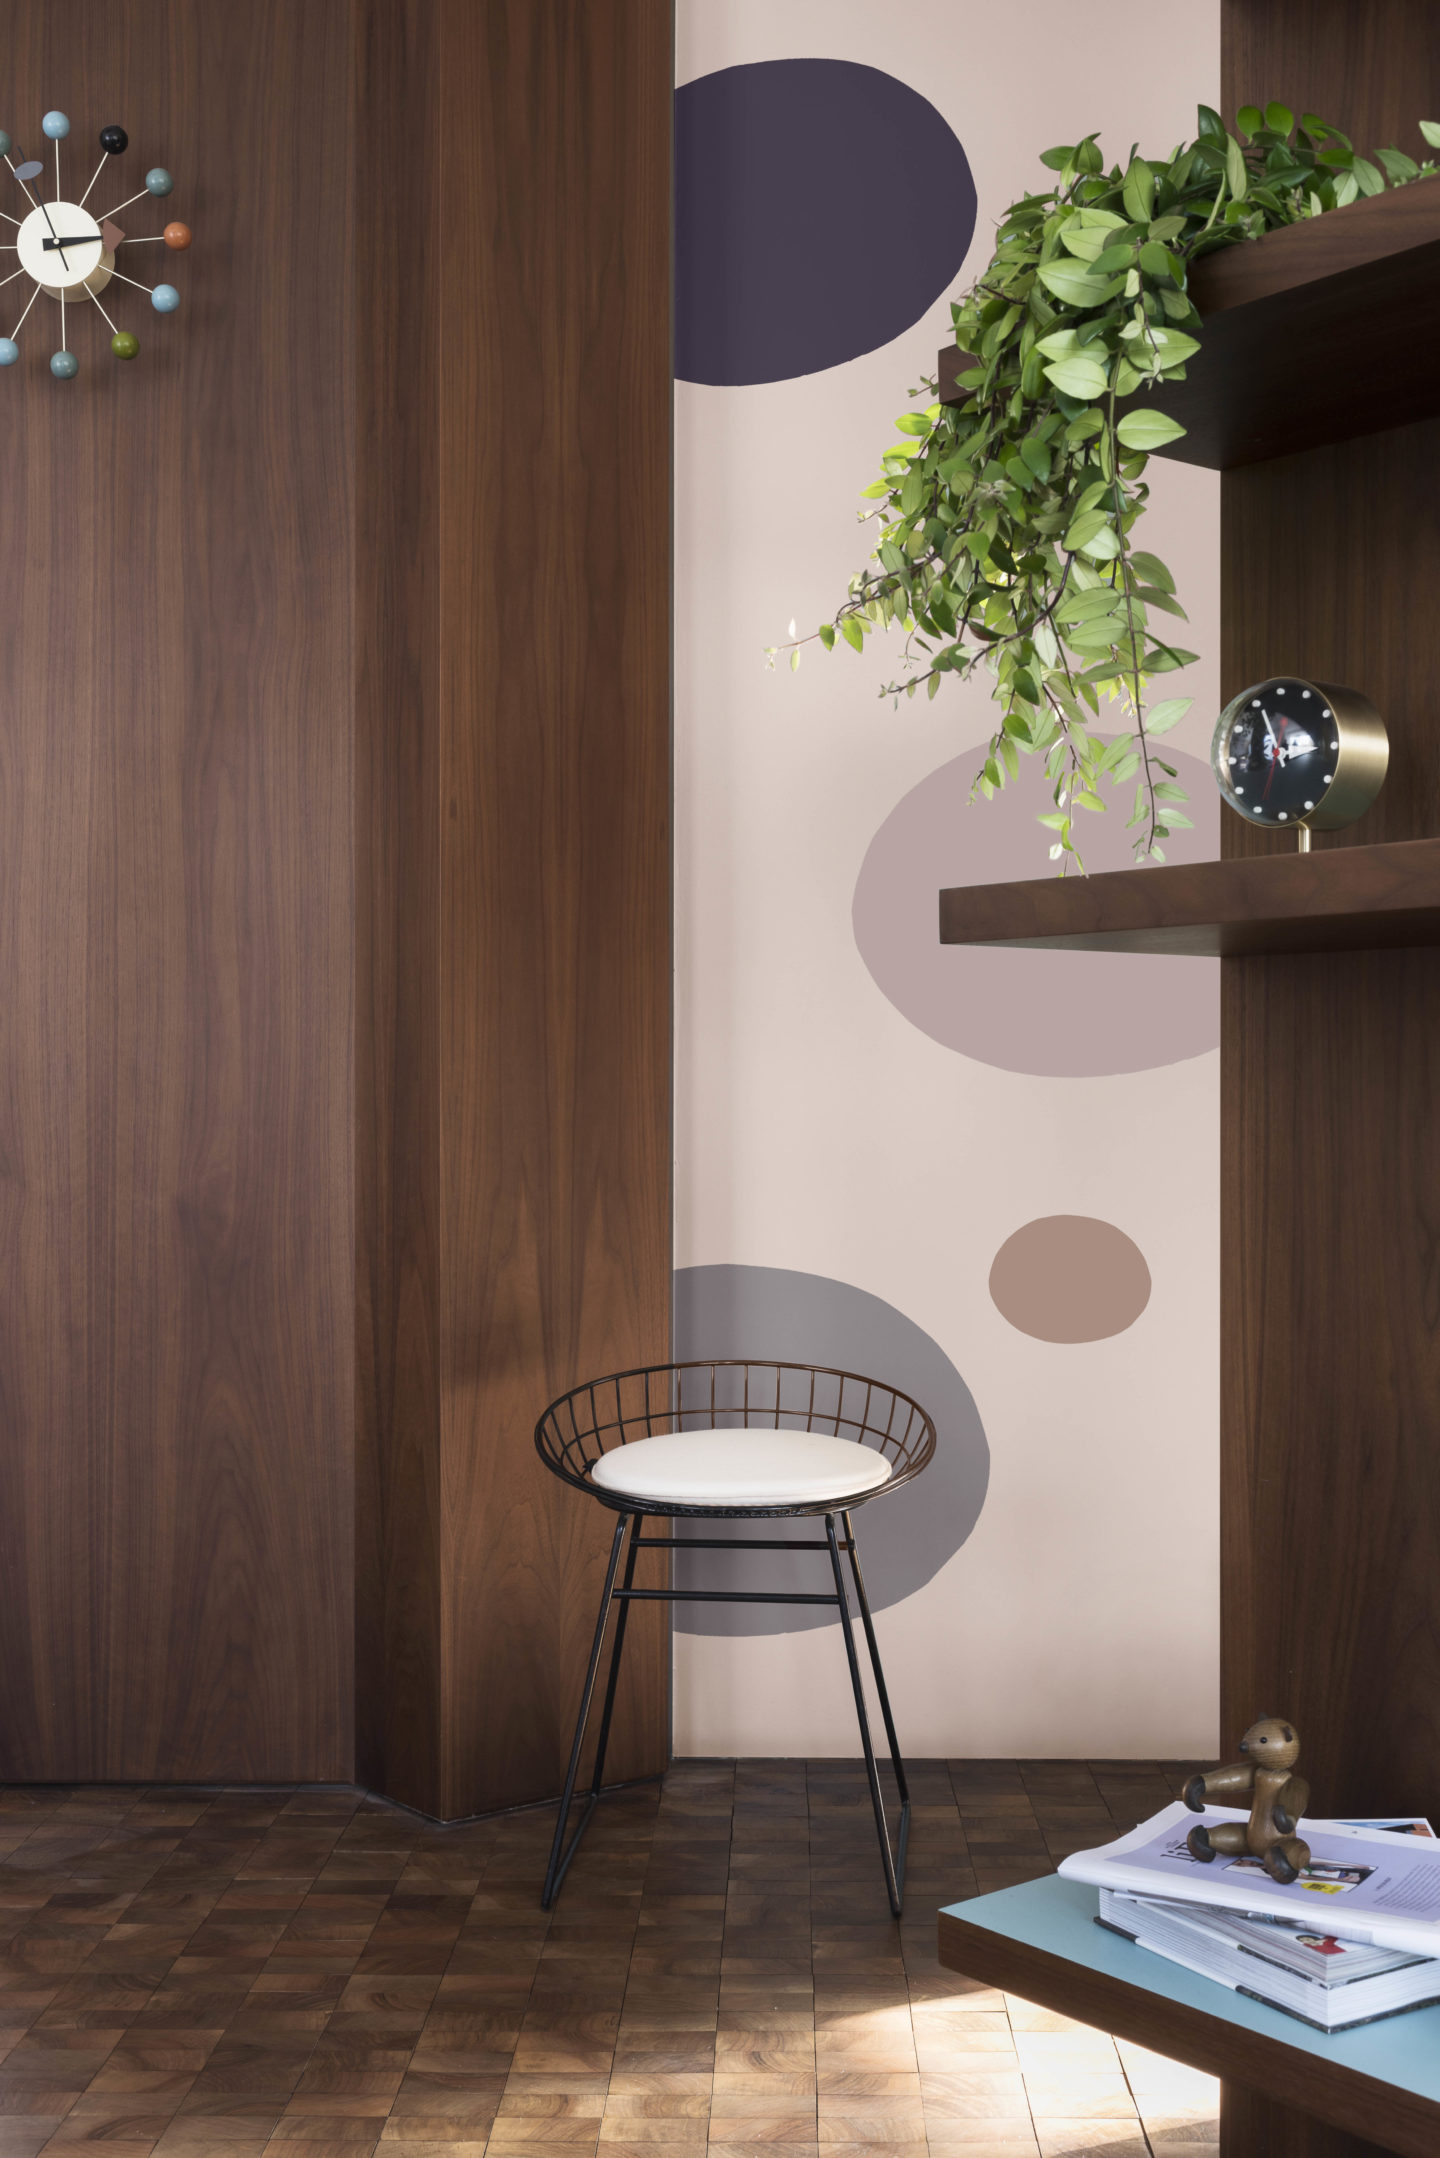 Dulux Colour of the Year - Heart Wood